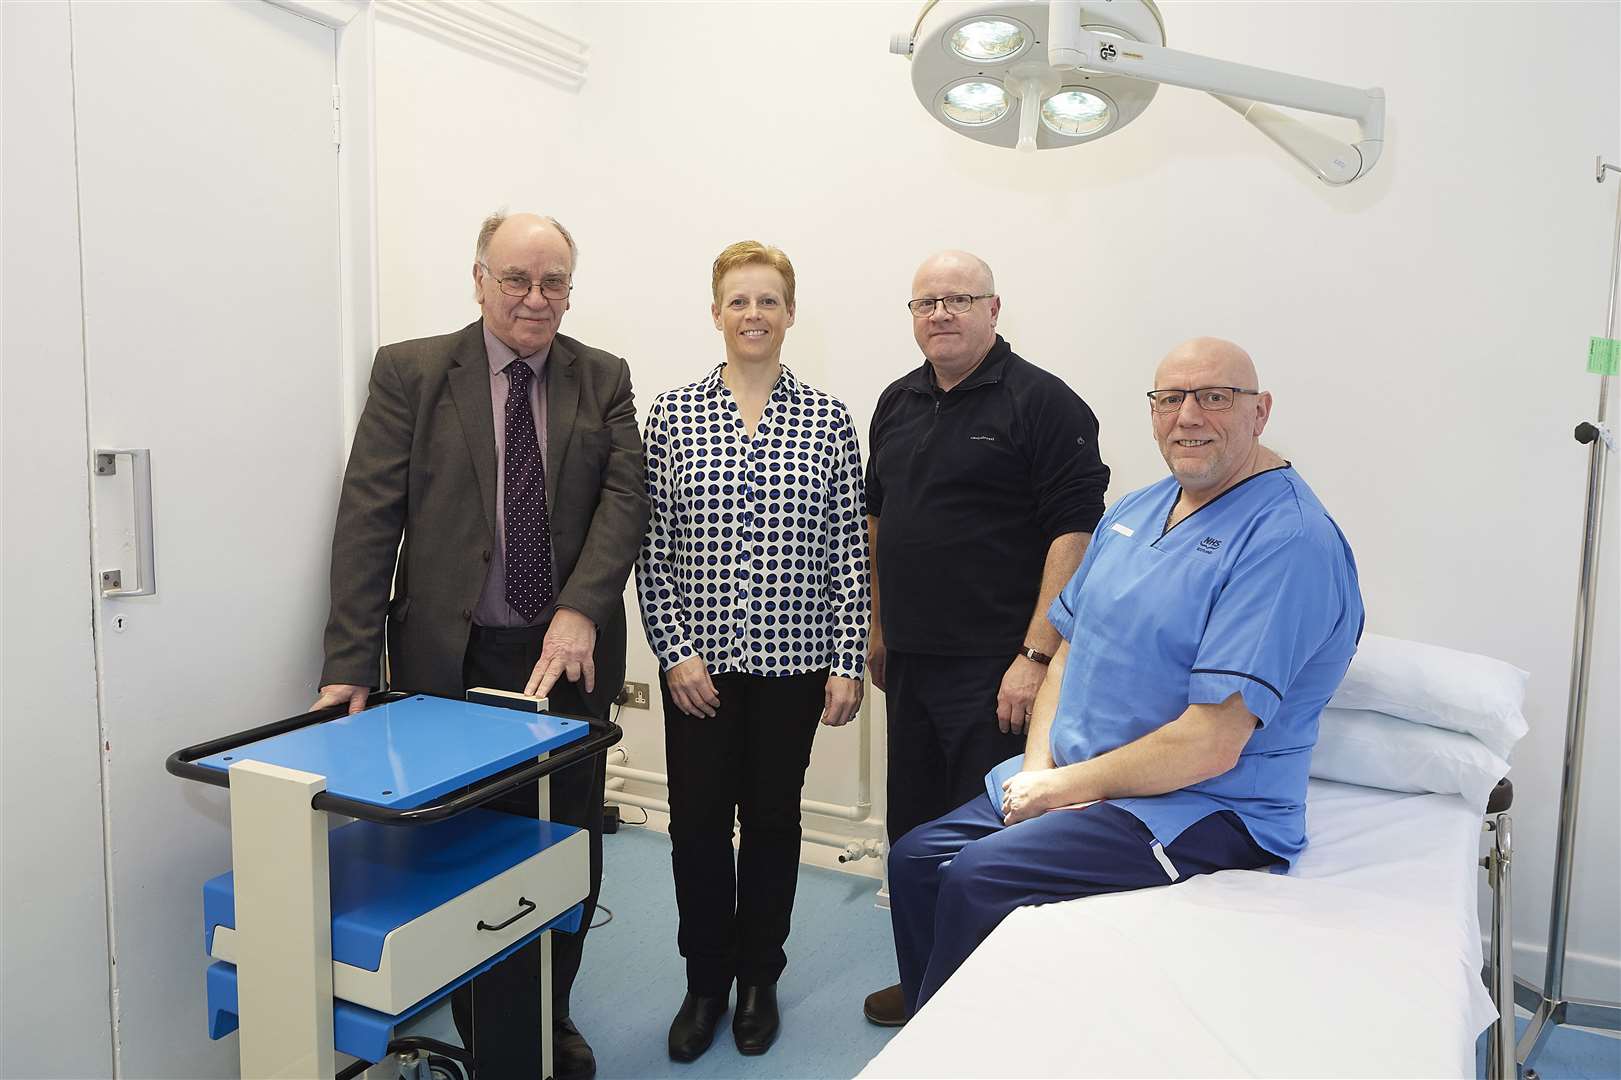 Businessman David Sutherland (left) with Jackie Milburn, Dr John Macleod and specialist nurse Anthony Lester at the Golspie treatment clinic.